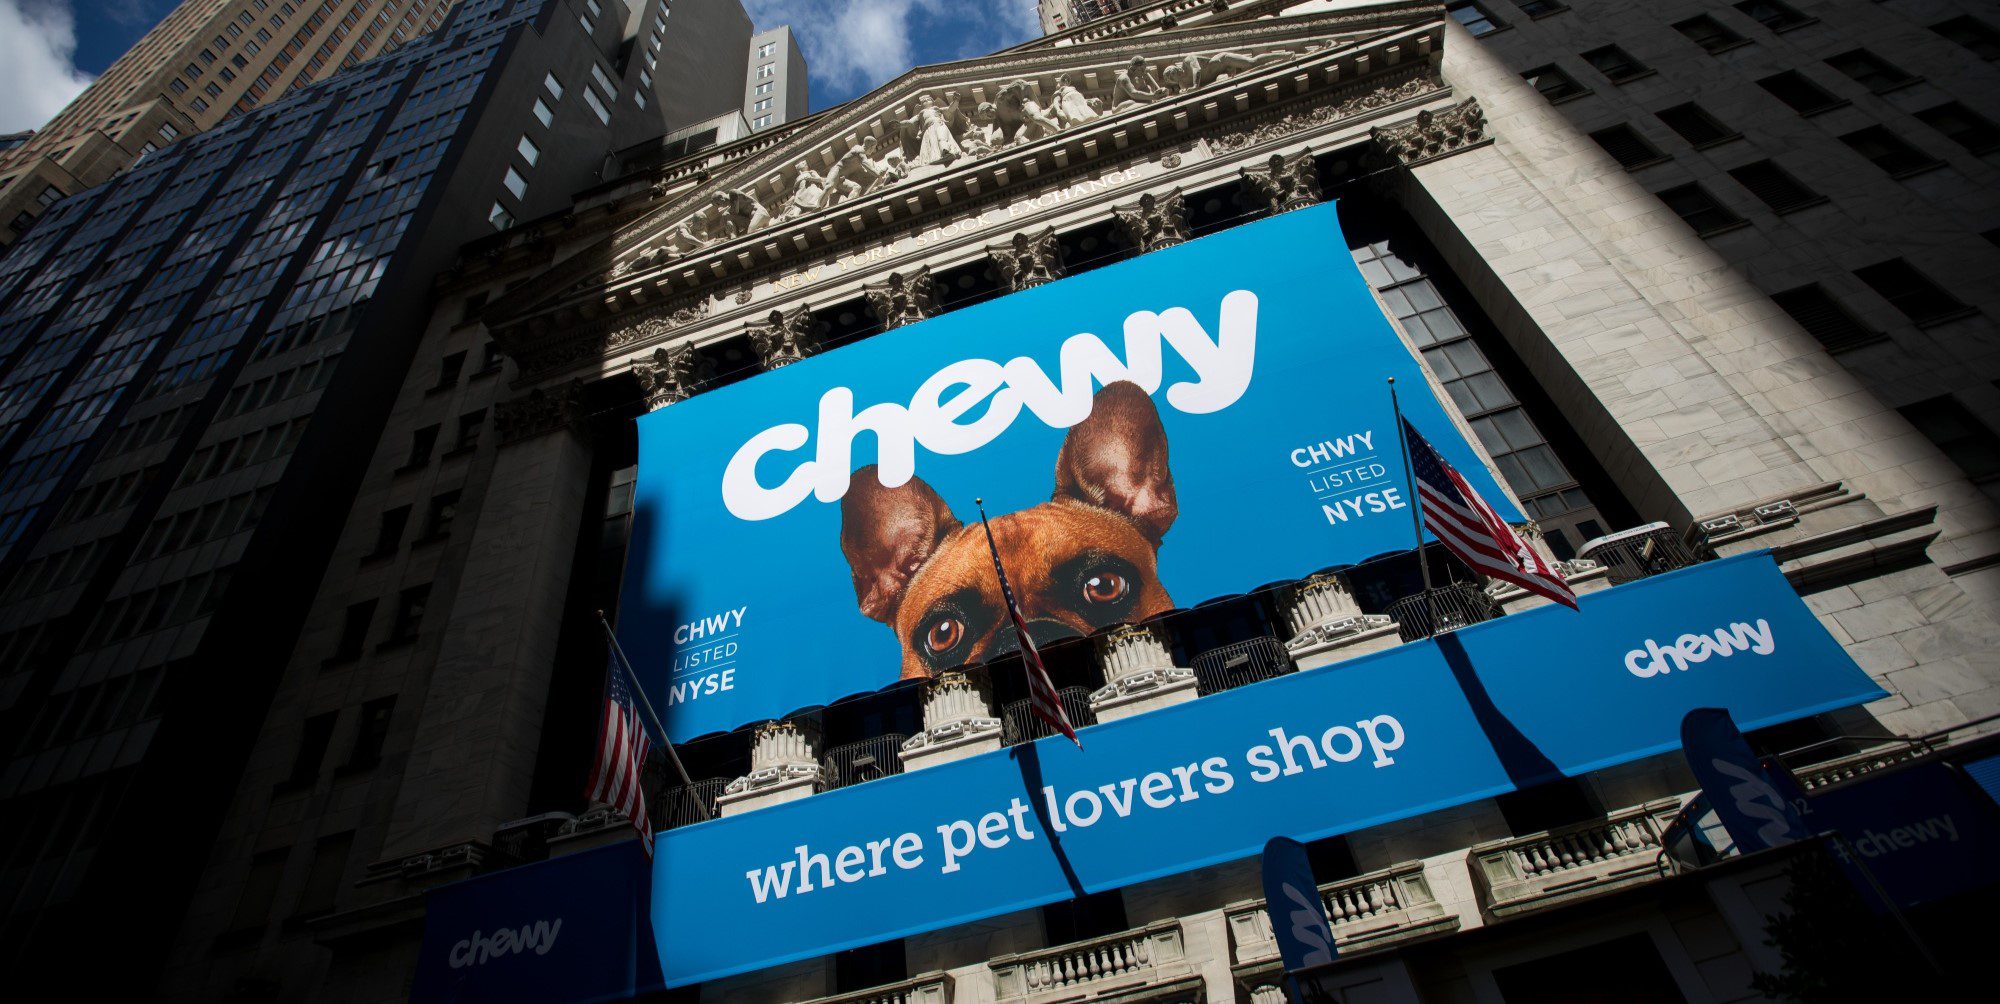 Chewy stock swings 34% as ‘Roaring Kitty’ posts dog image